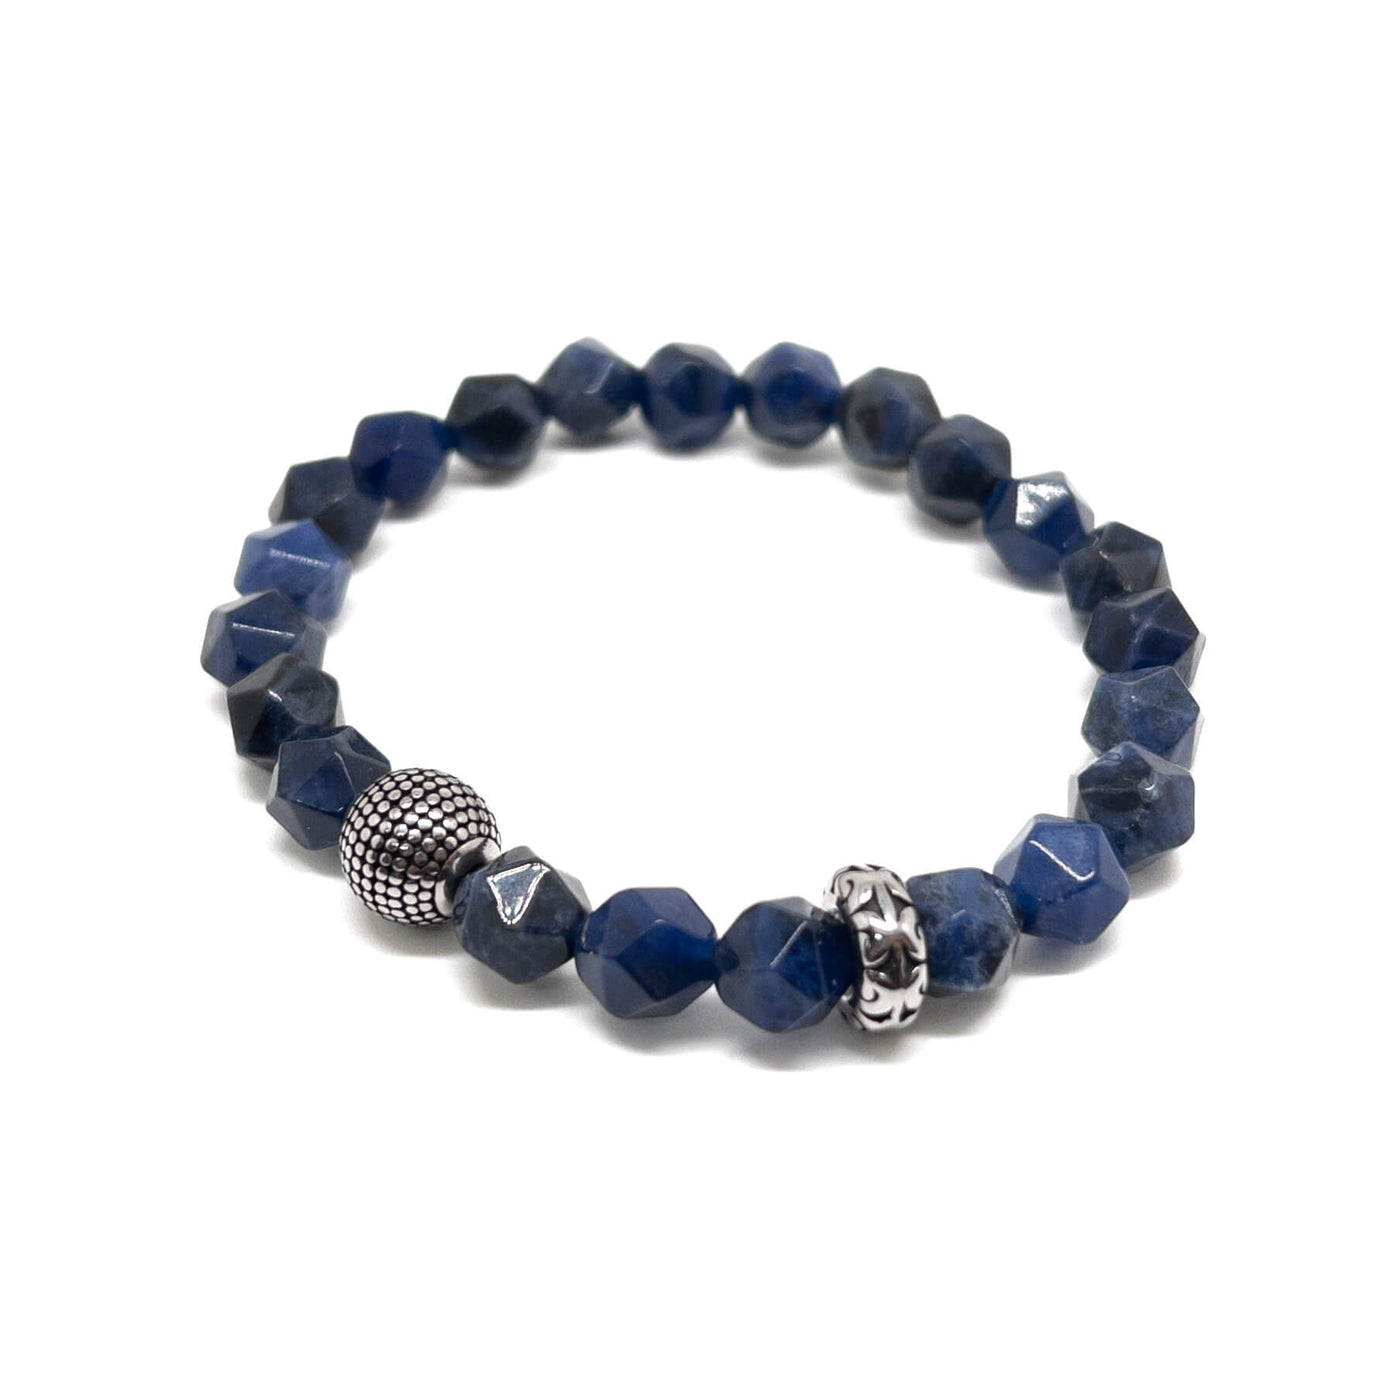 The Faceted Blue Sodalite  Stone and Silver Cylinder Bracelet